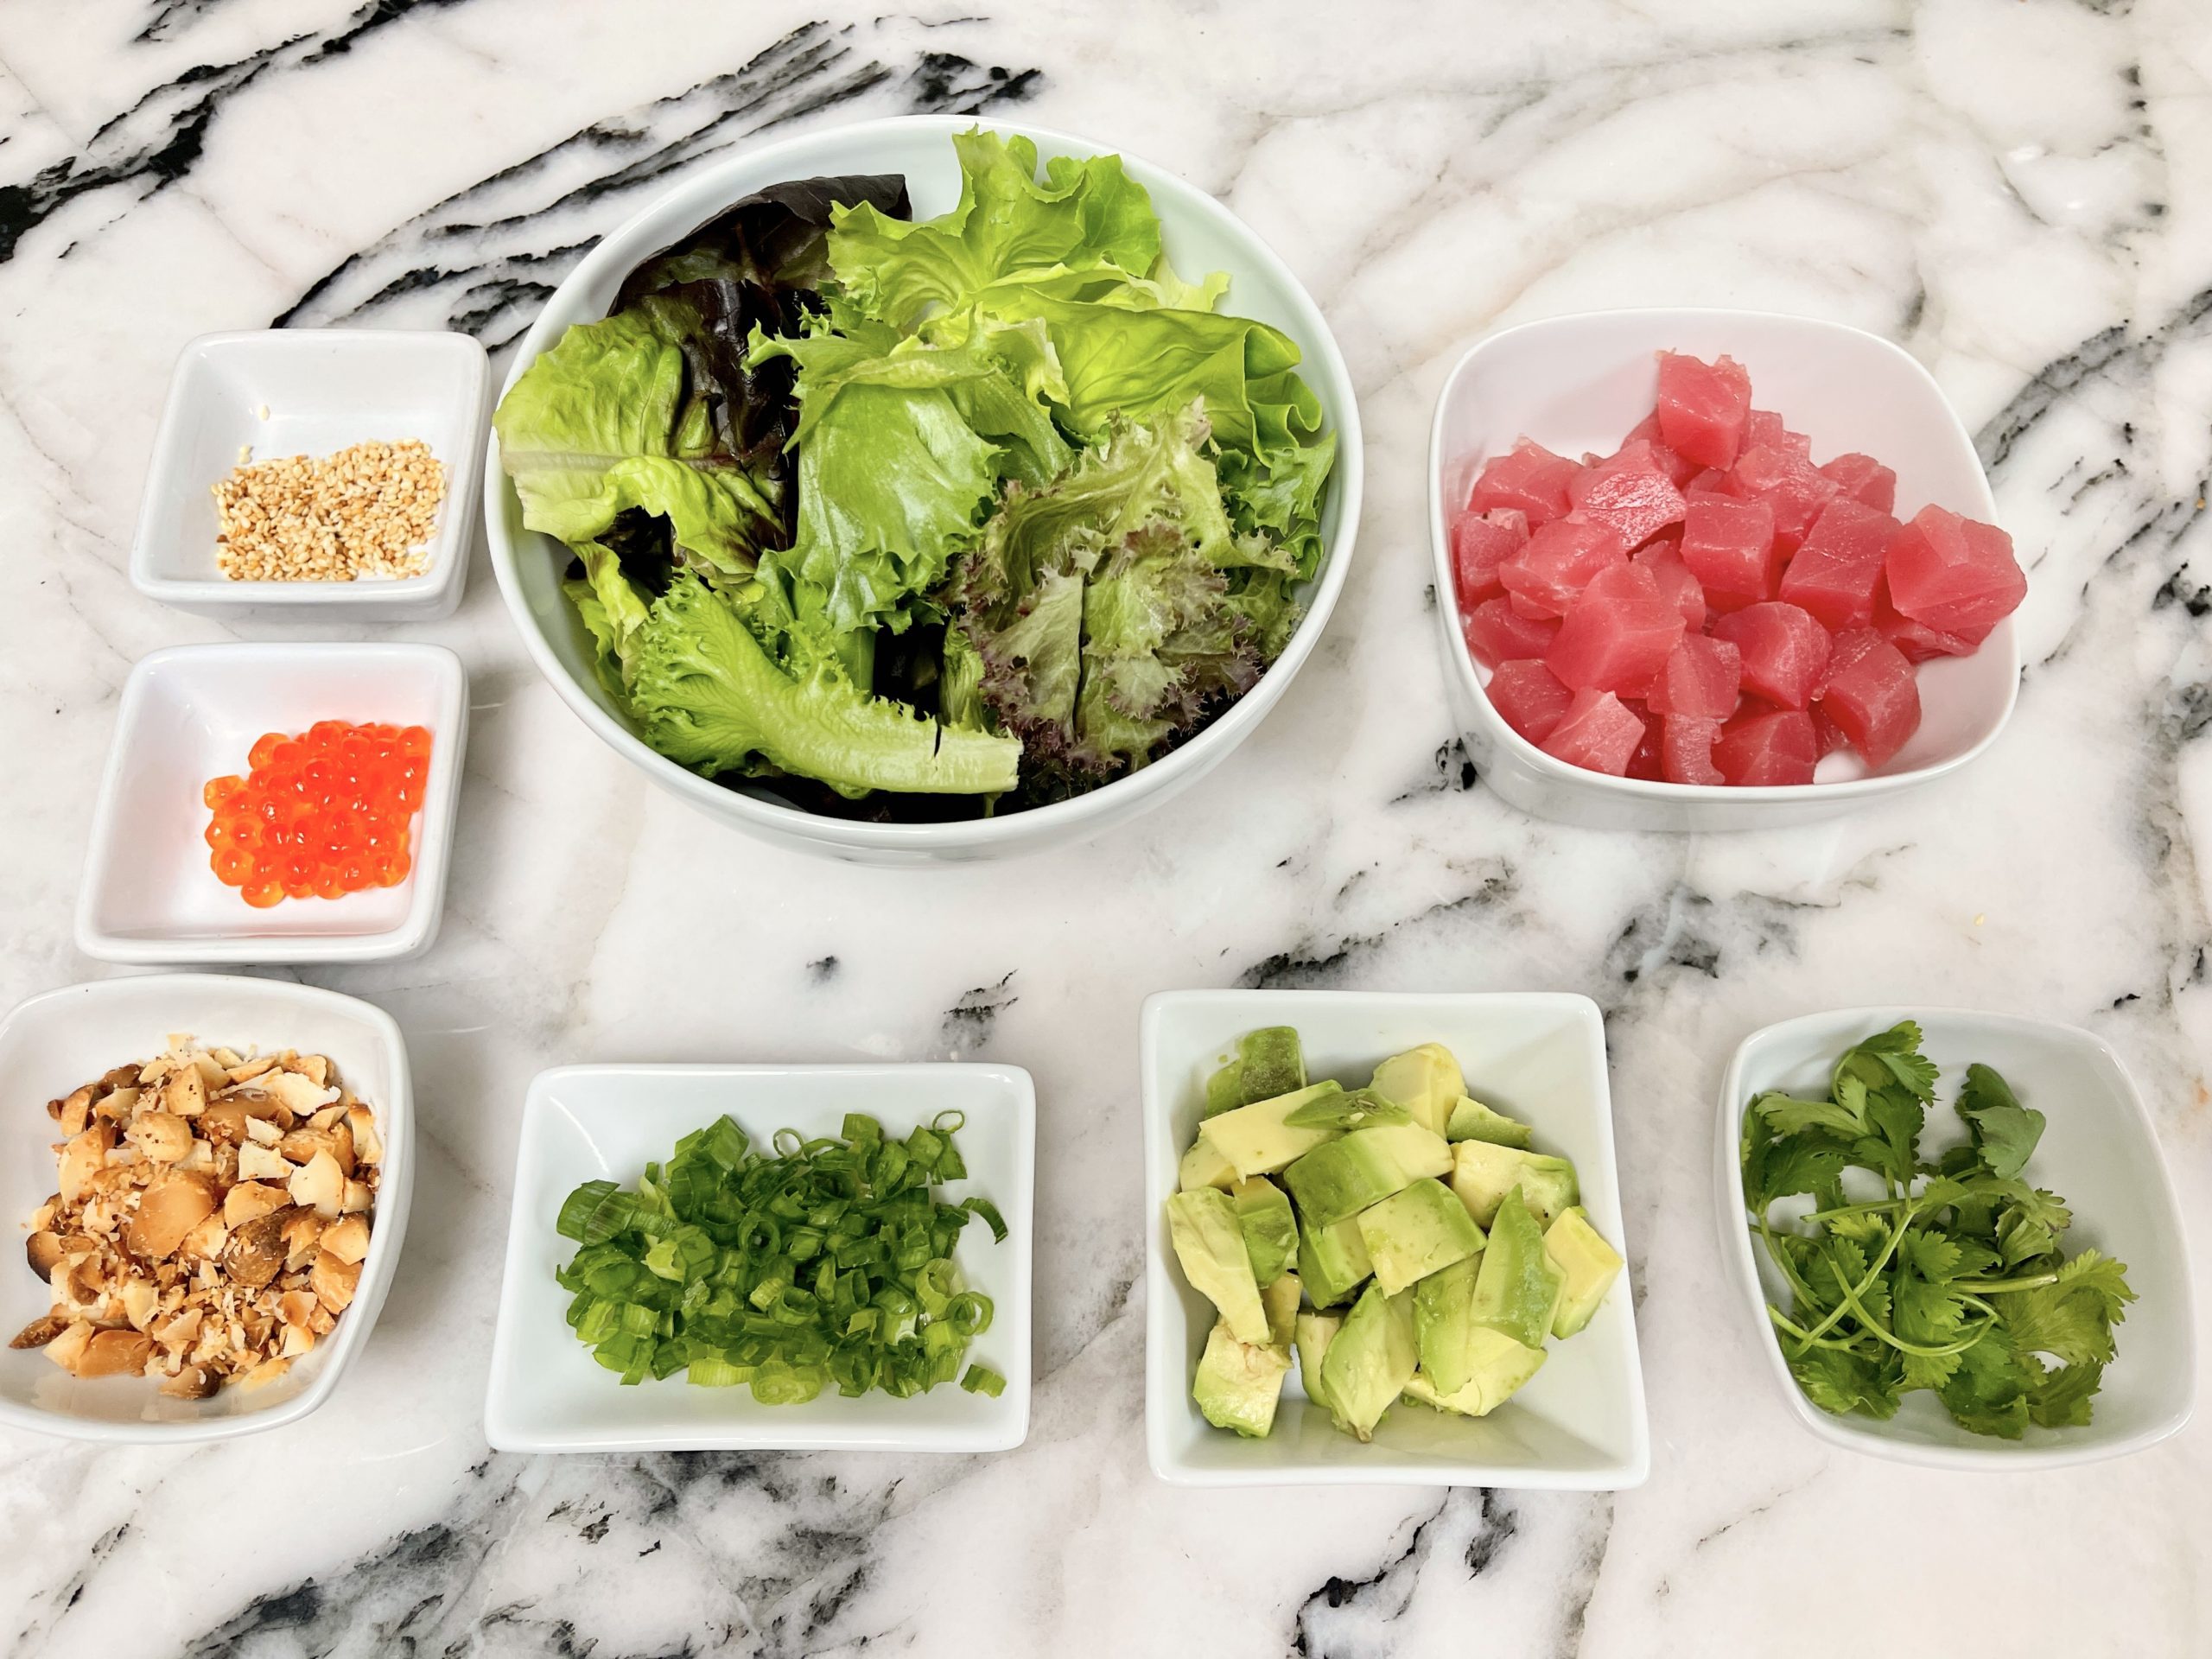 organize all of the Poke ingredients - lettuce, diced tuna, diced avocado, scallions, cilantro, toasted macadamia nuts, toasted sesame seeds, and roe (optional)